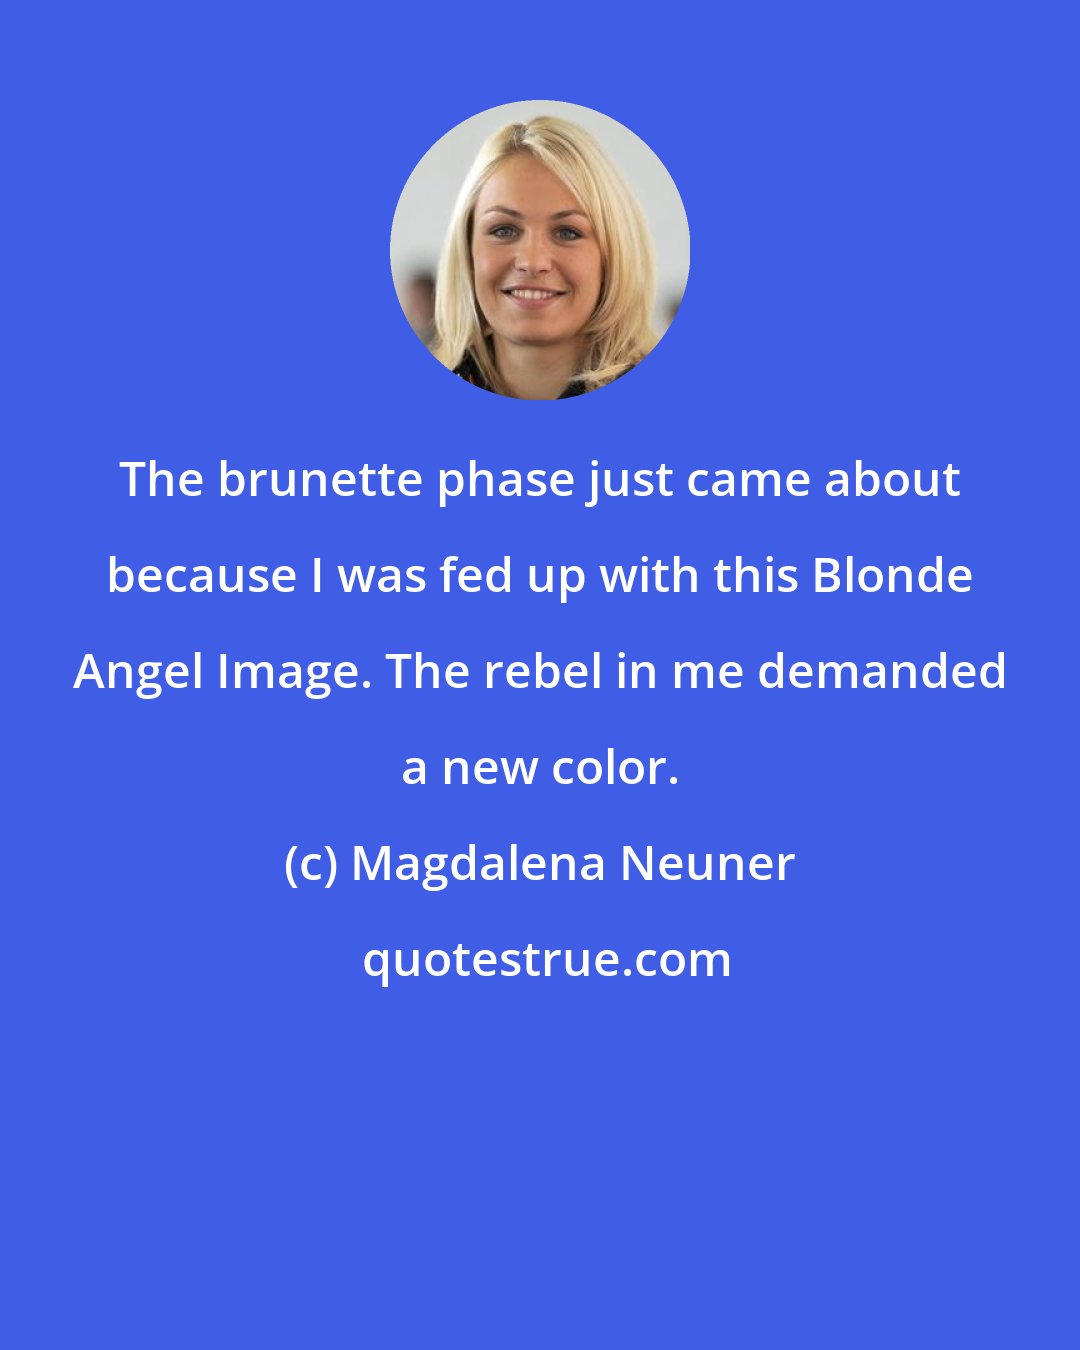 Magdalena Neuner: The brunette phase just came about because I was fed up with this Blonde Angel Image. The rebel in me demanded a new color.